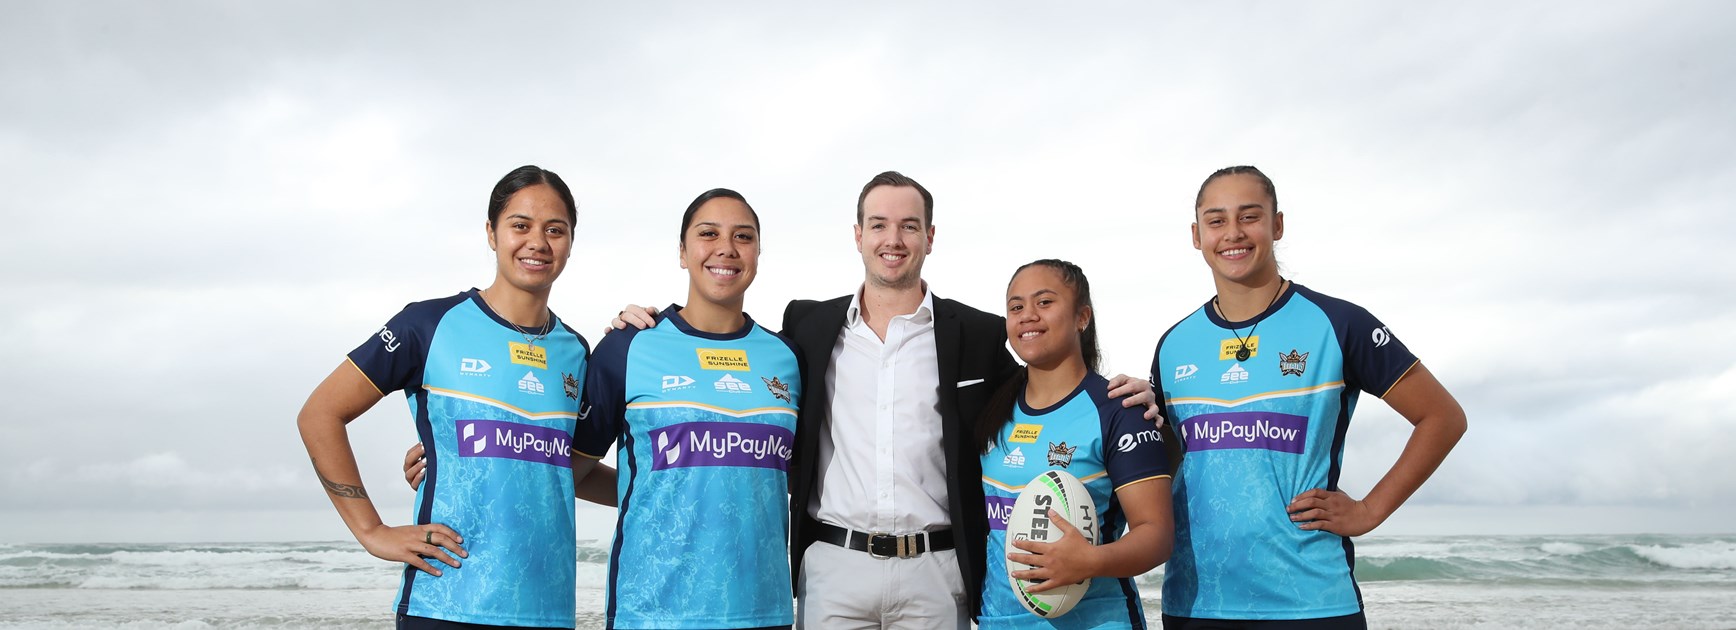 Destiny part of Titans NRLW future as signings unveiled